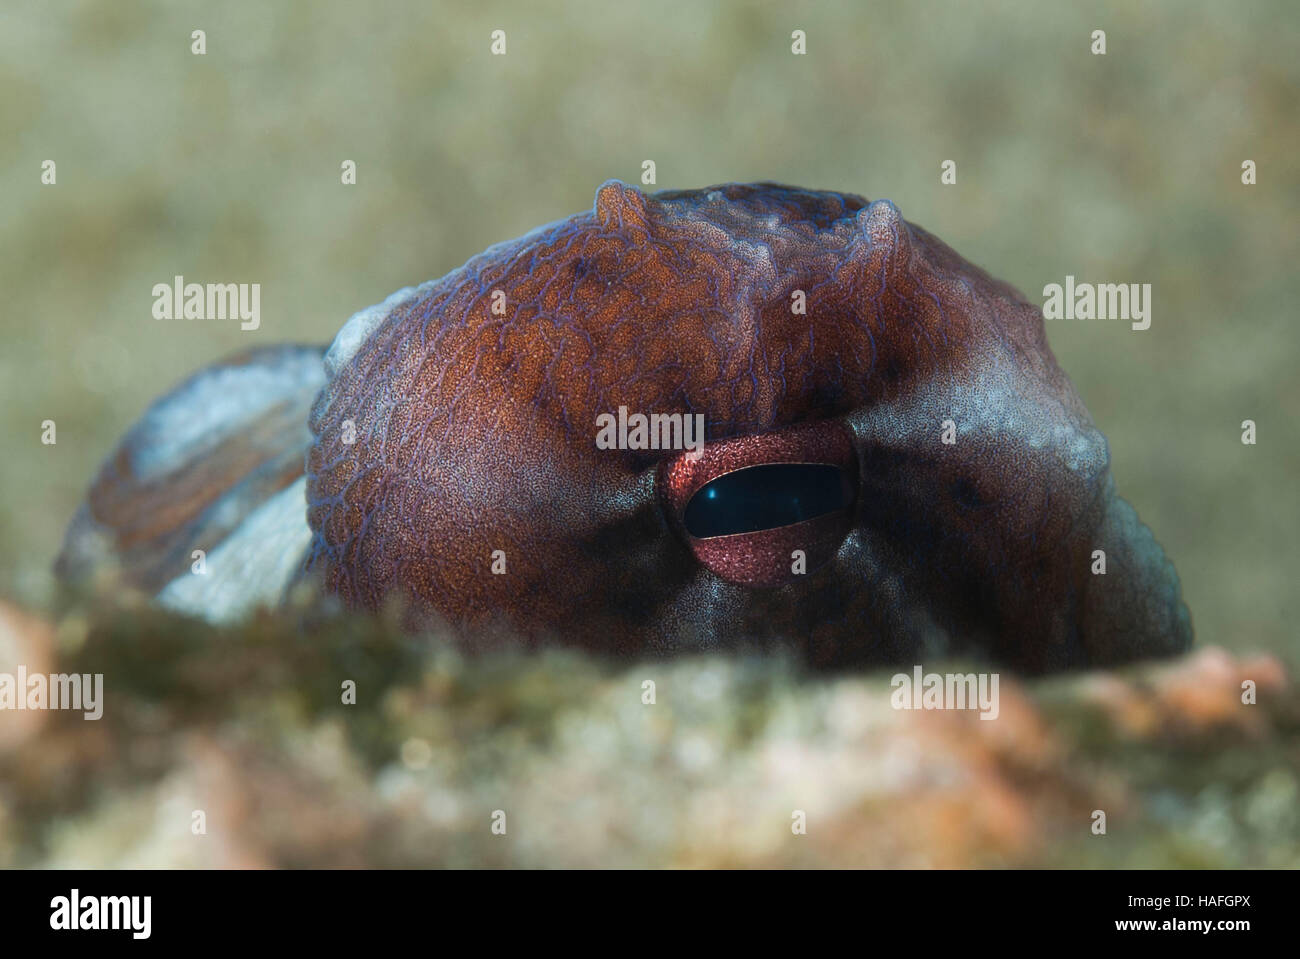 SCOTTBURGH, SOUTH AFRICA. 7 July 2016. An Octopus peeks over a rock in the tidal pool near Scottburgh, South Africa. Stock Photo